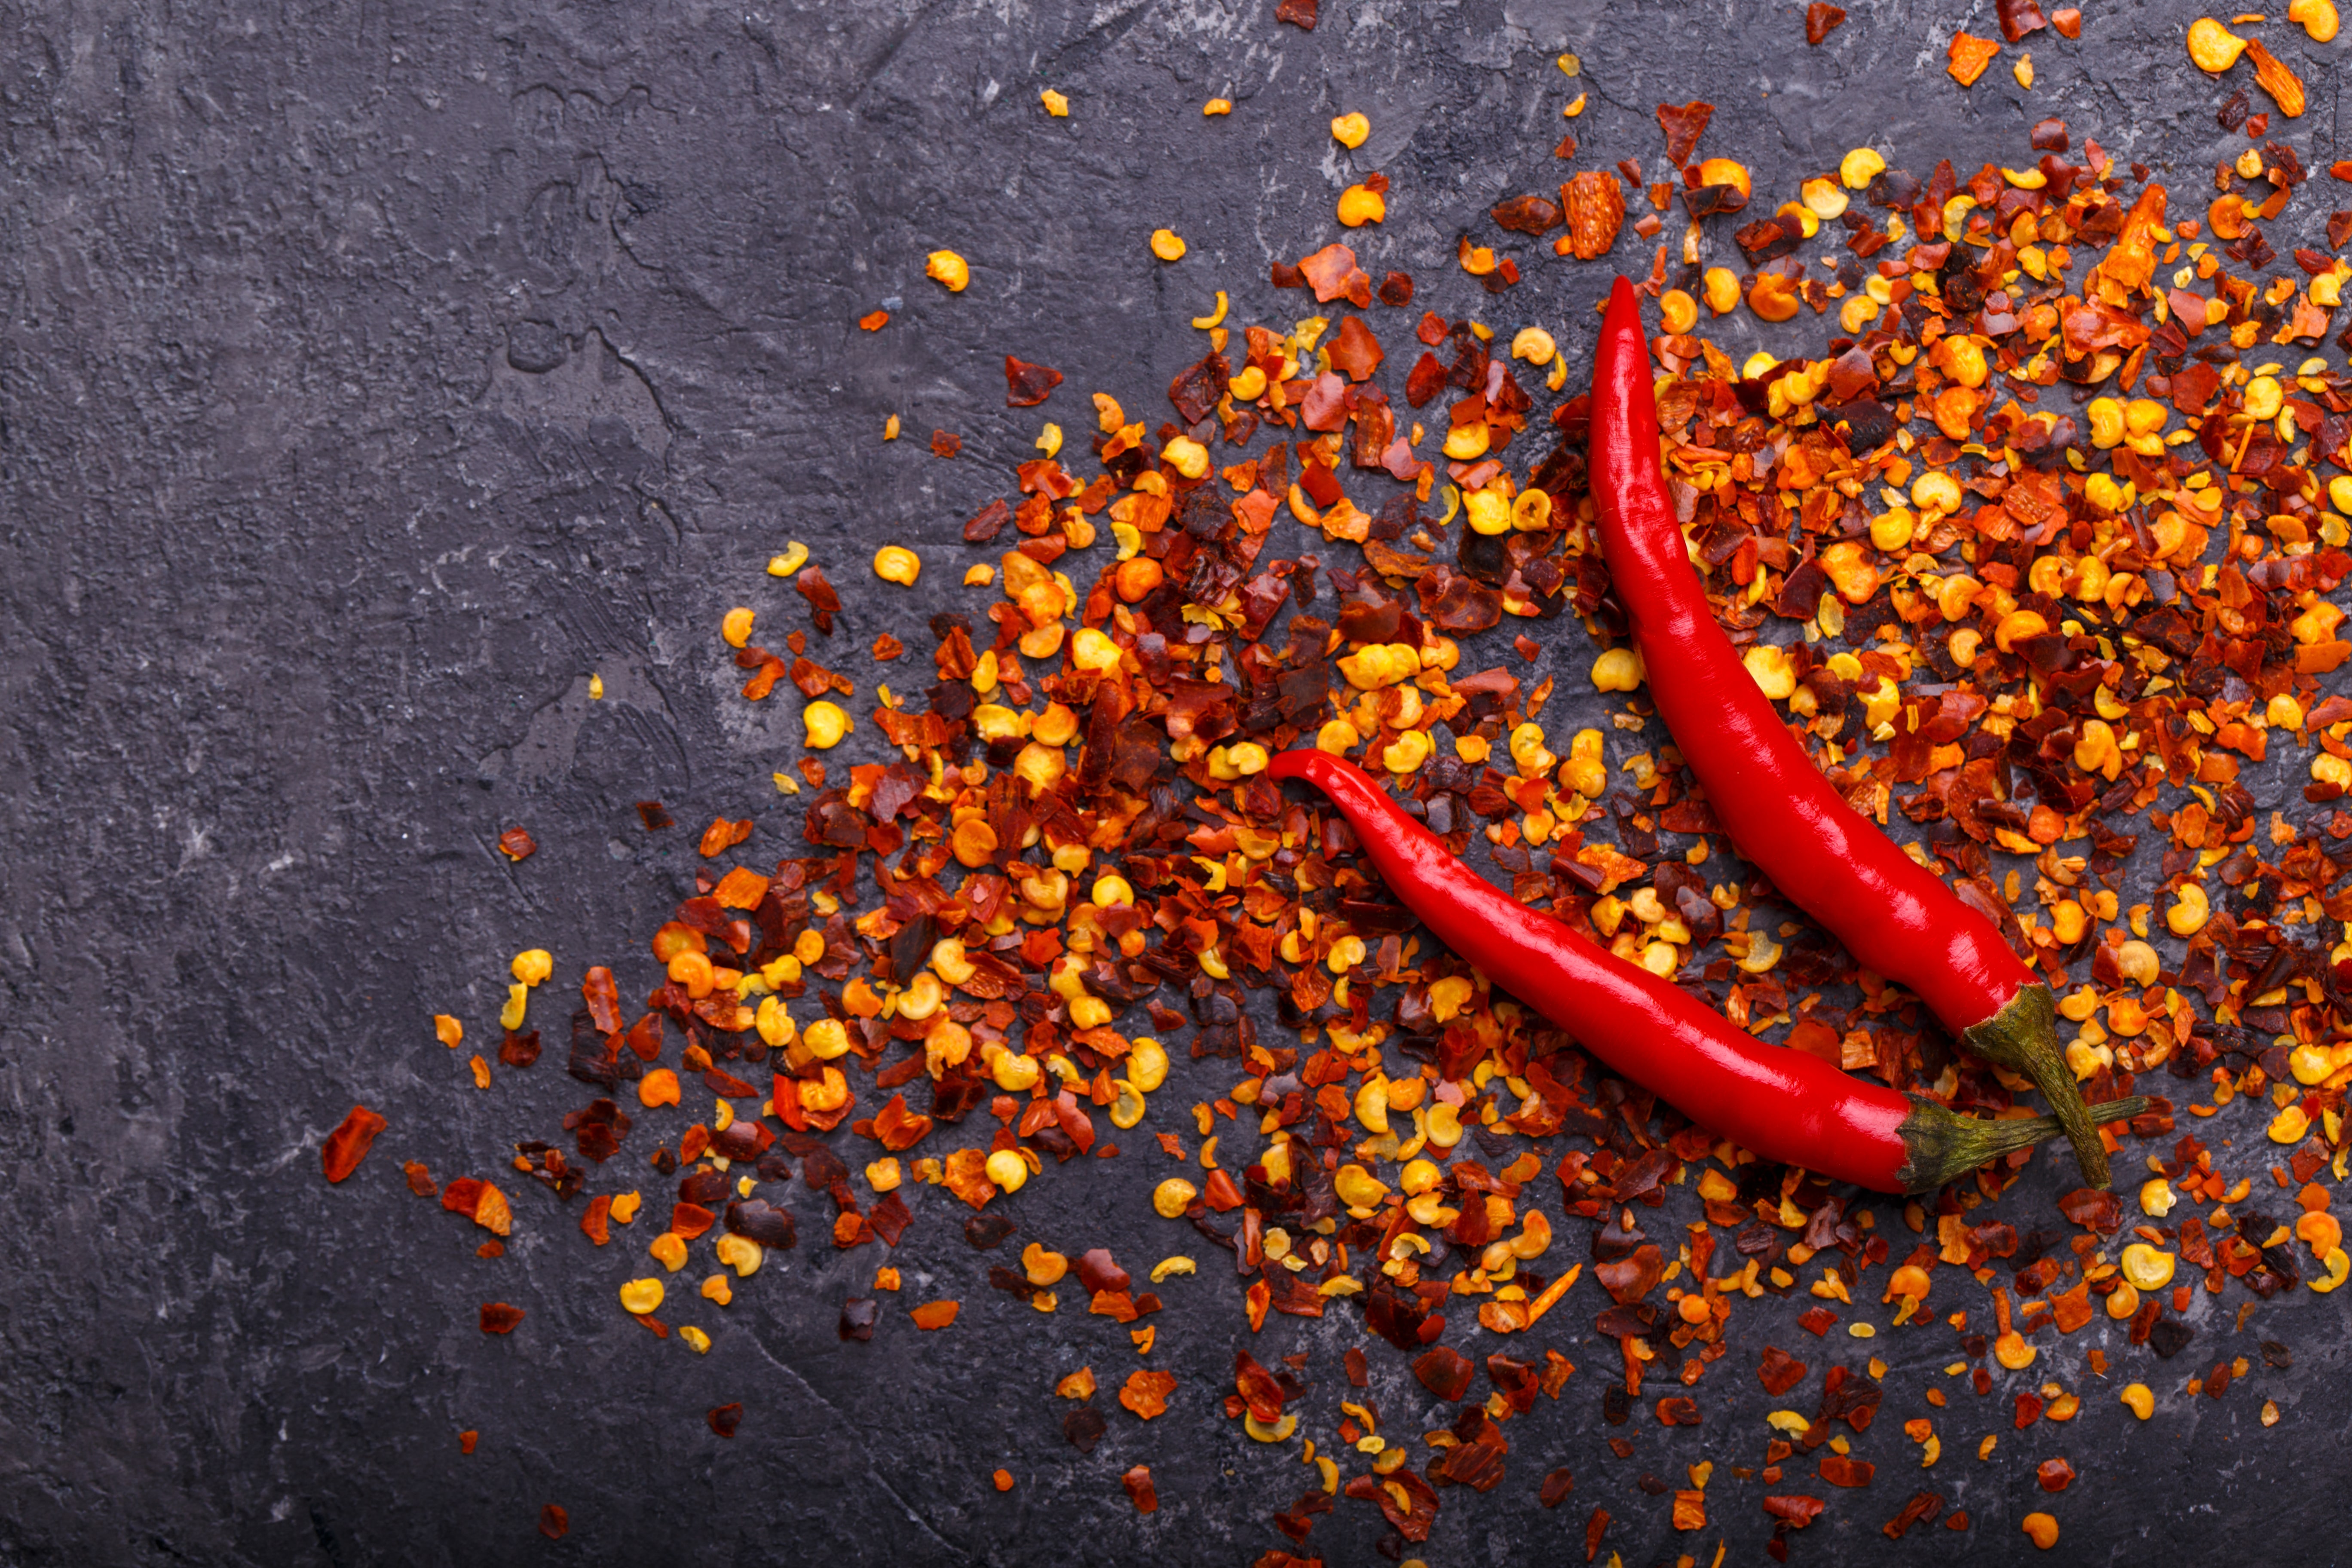 difference between chili powder vs red pepper flakes vs paprika